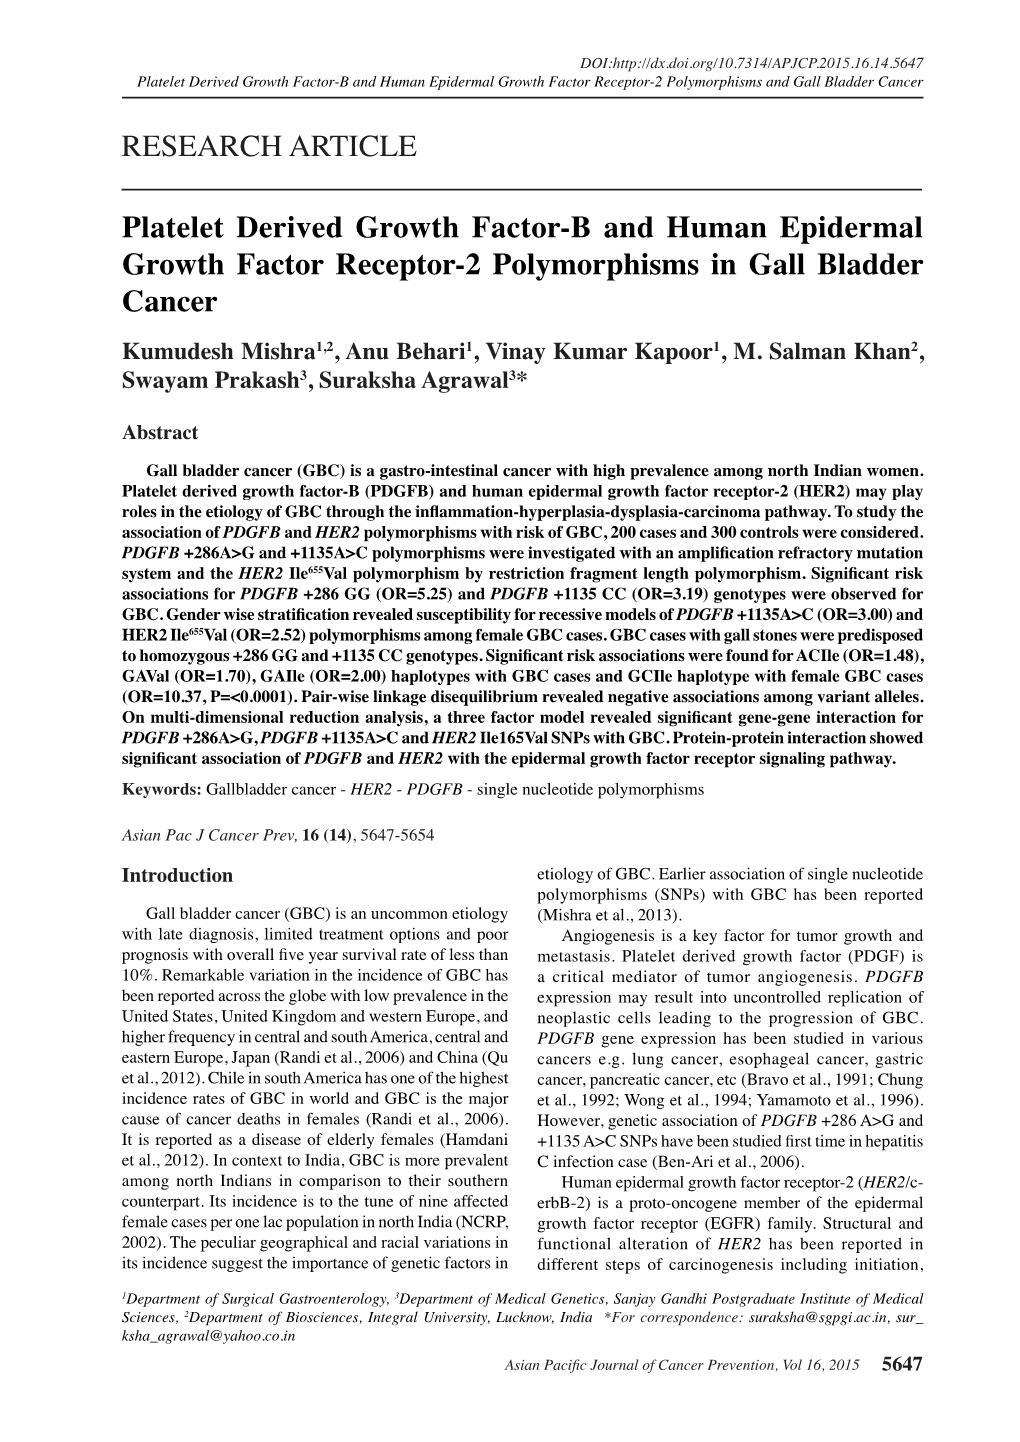 Platelet Derived Growth Factor-B and Human Epidermal Growth Factor Receptor-2 Polymorphisms and Gall Bladder Cancer